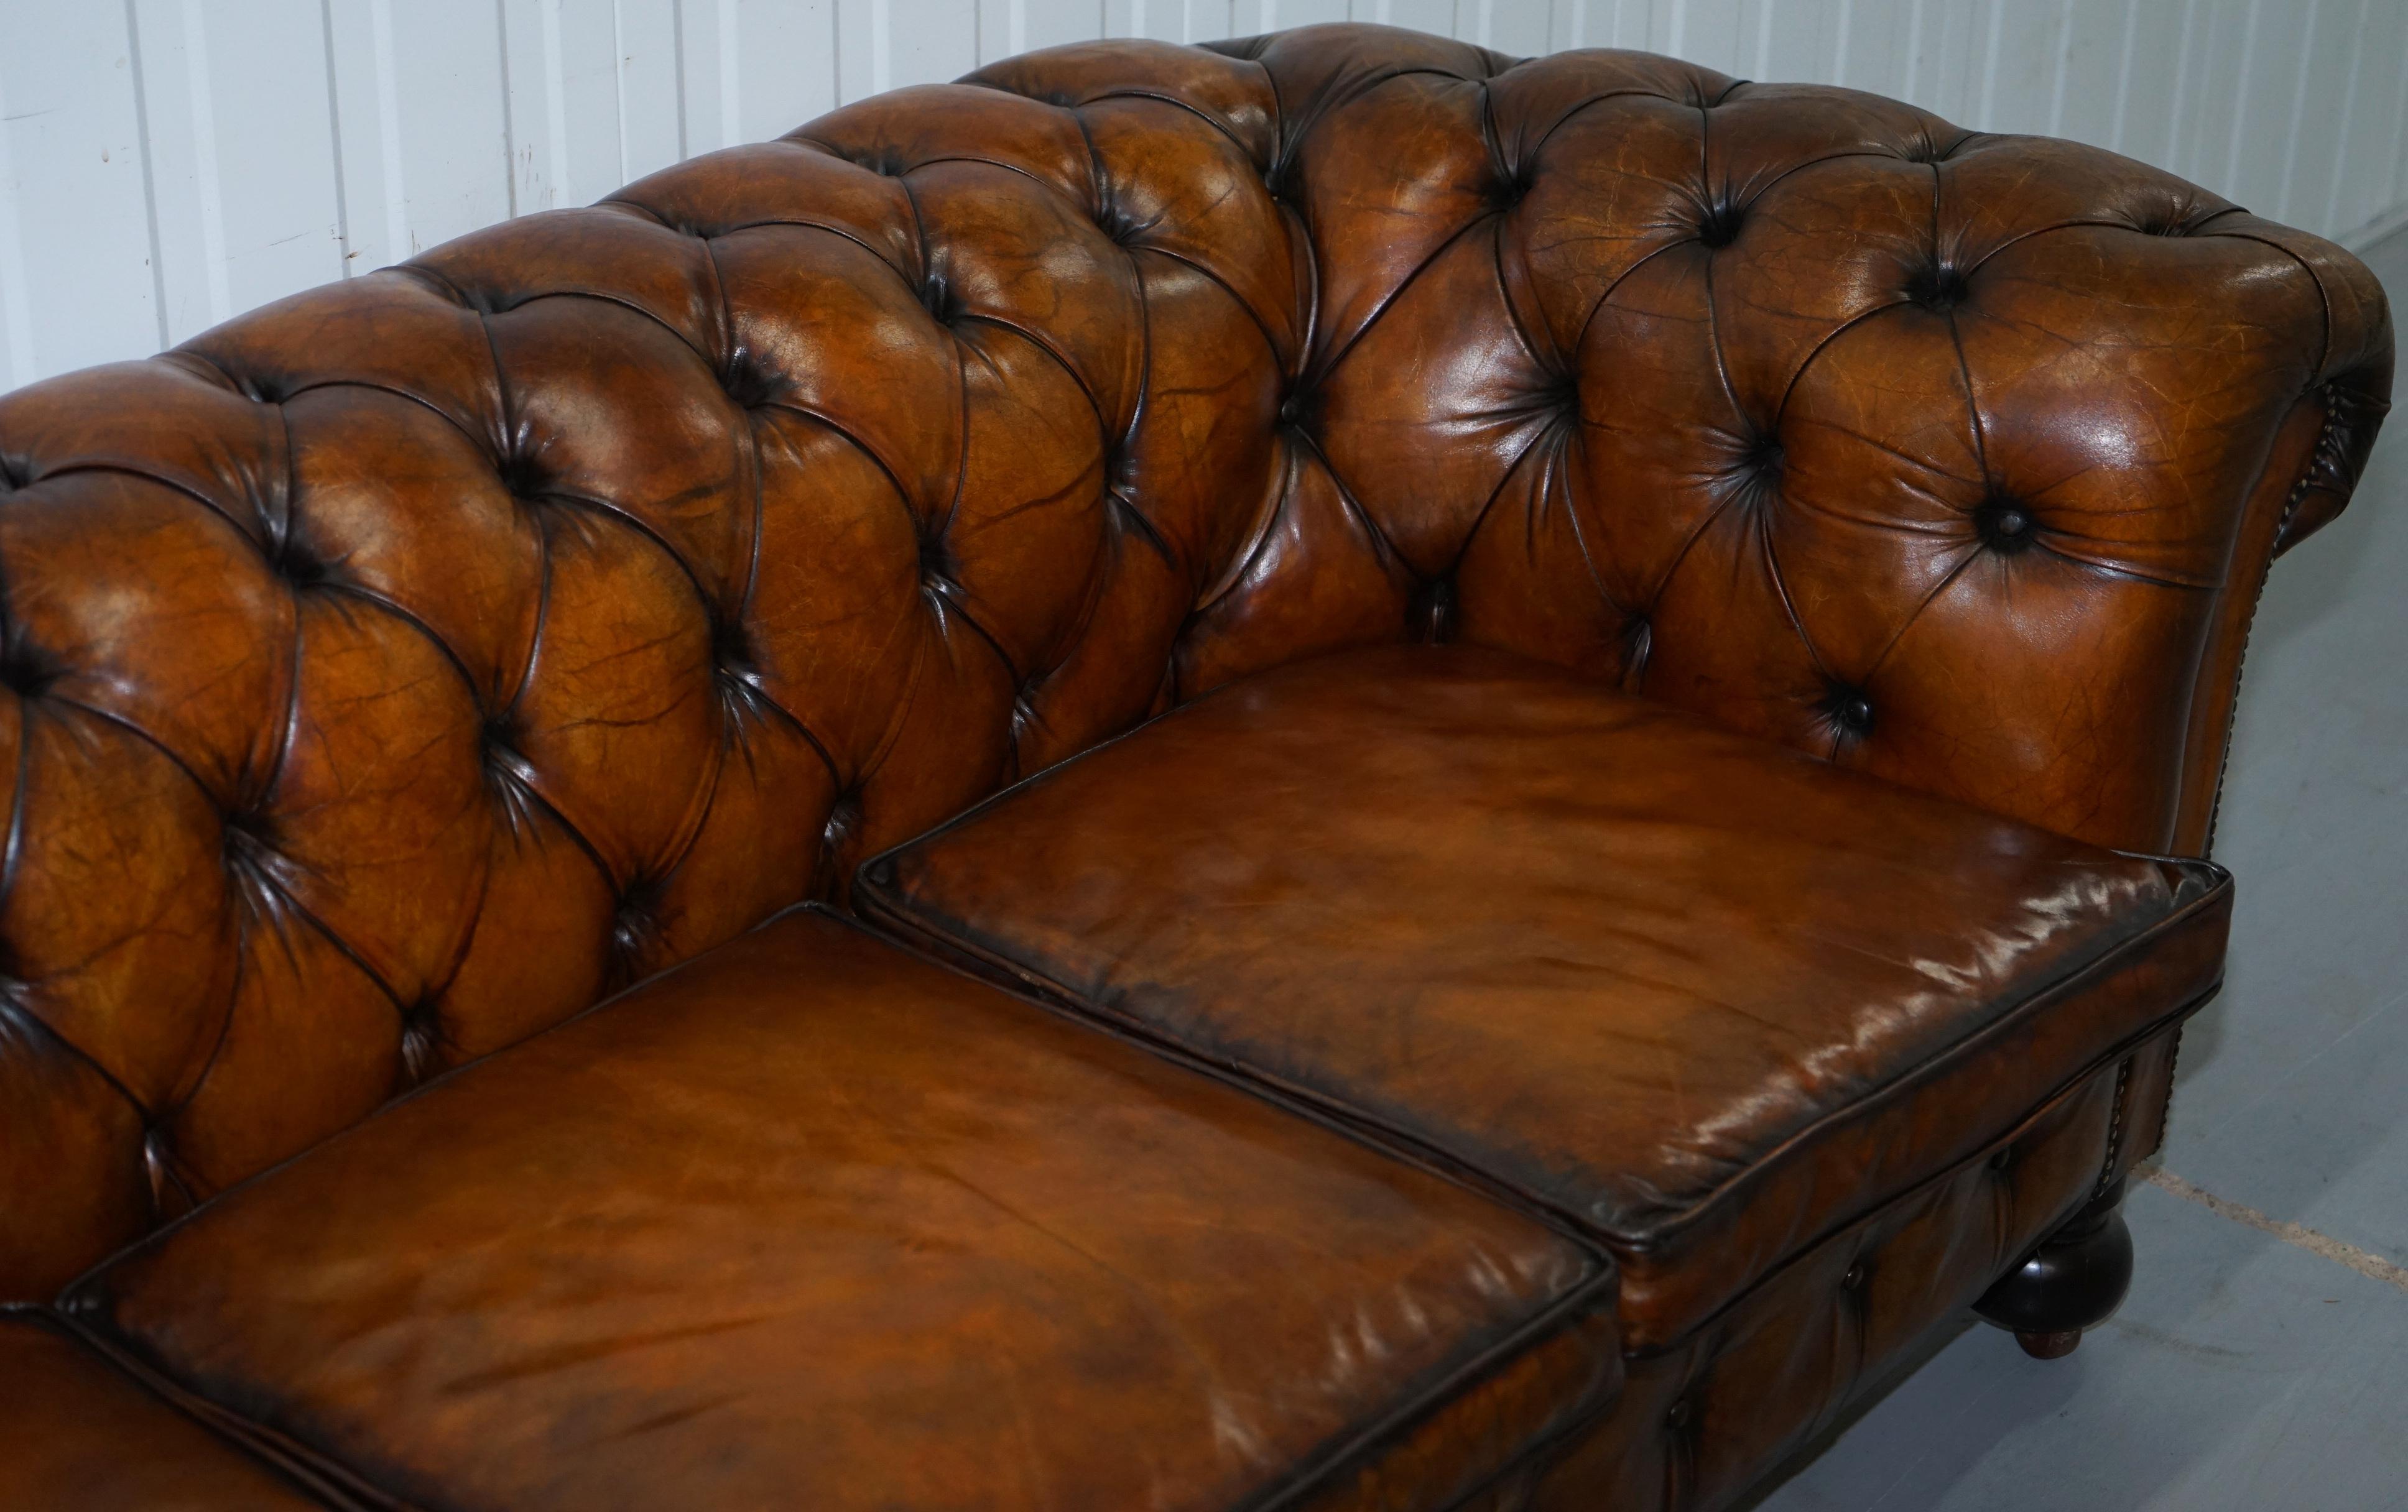 Very Rare Edwardian Fully Restored Hand Dyed Brown Leather Chesterfield Sofa (Frühes 20. Jahrhundert)